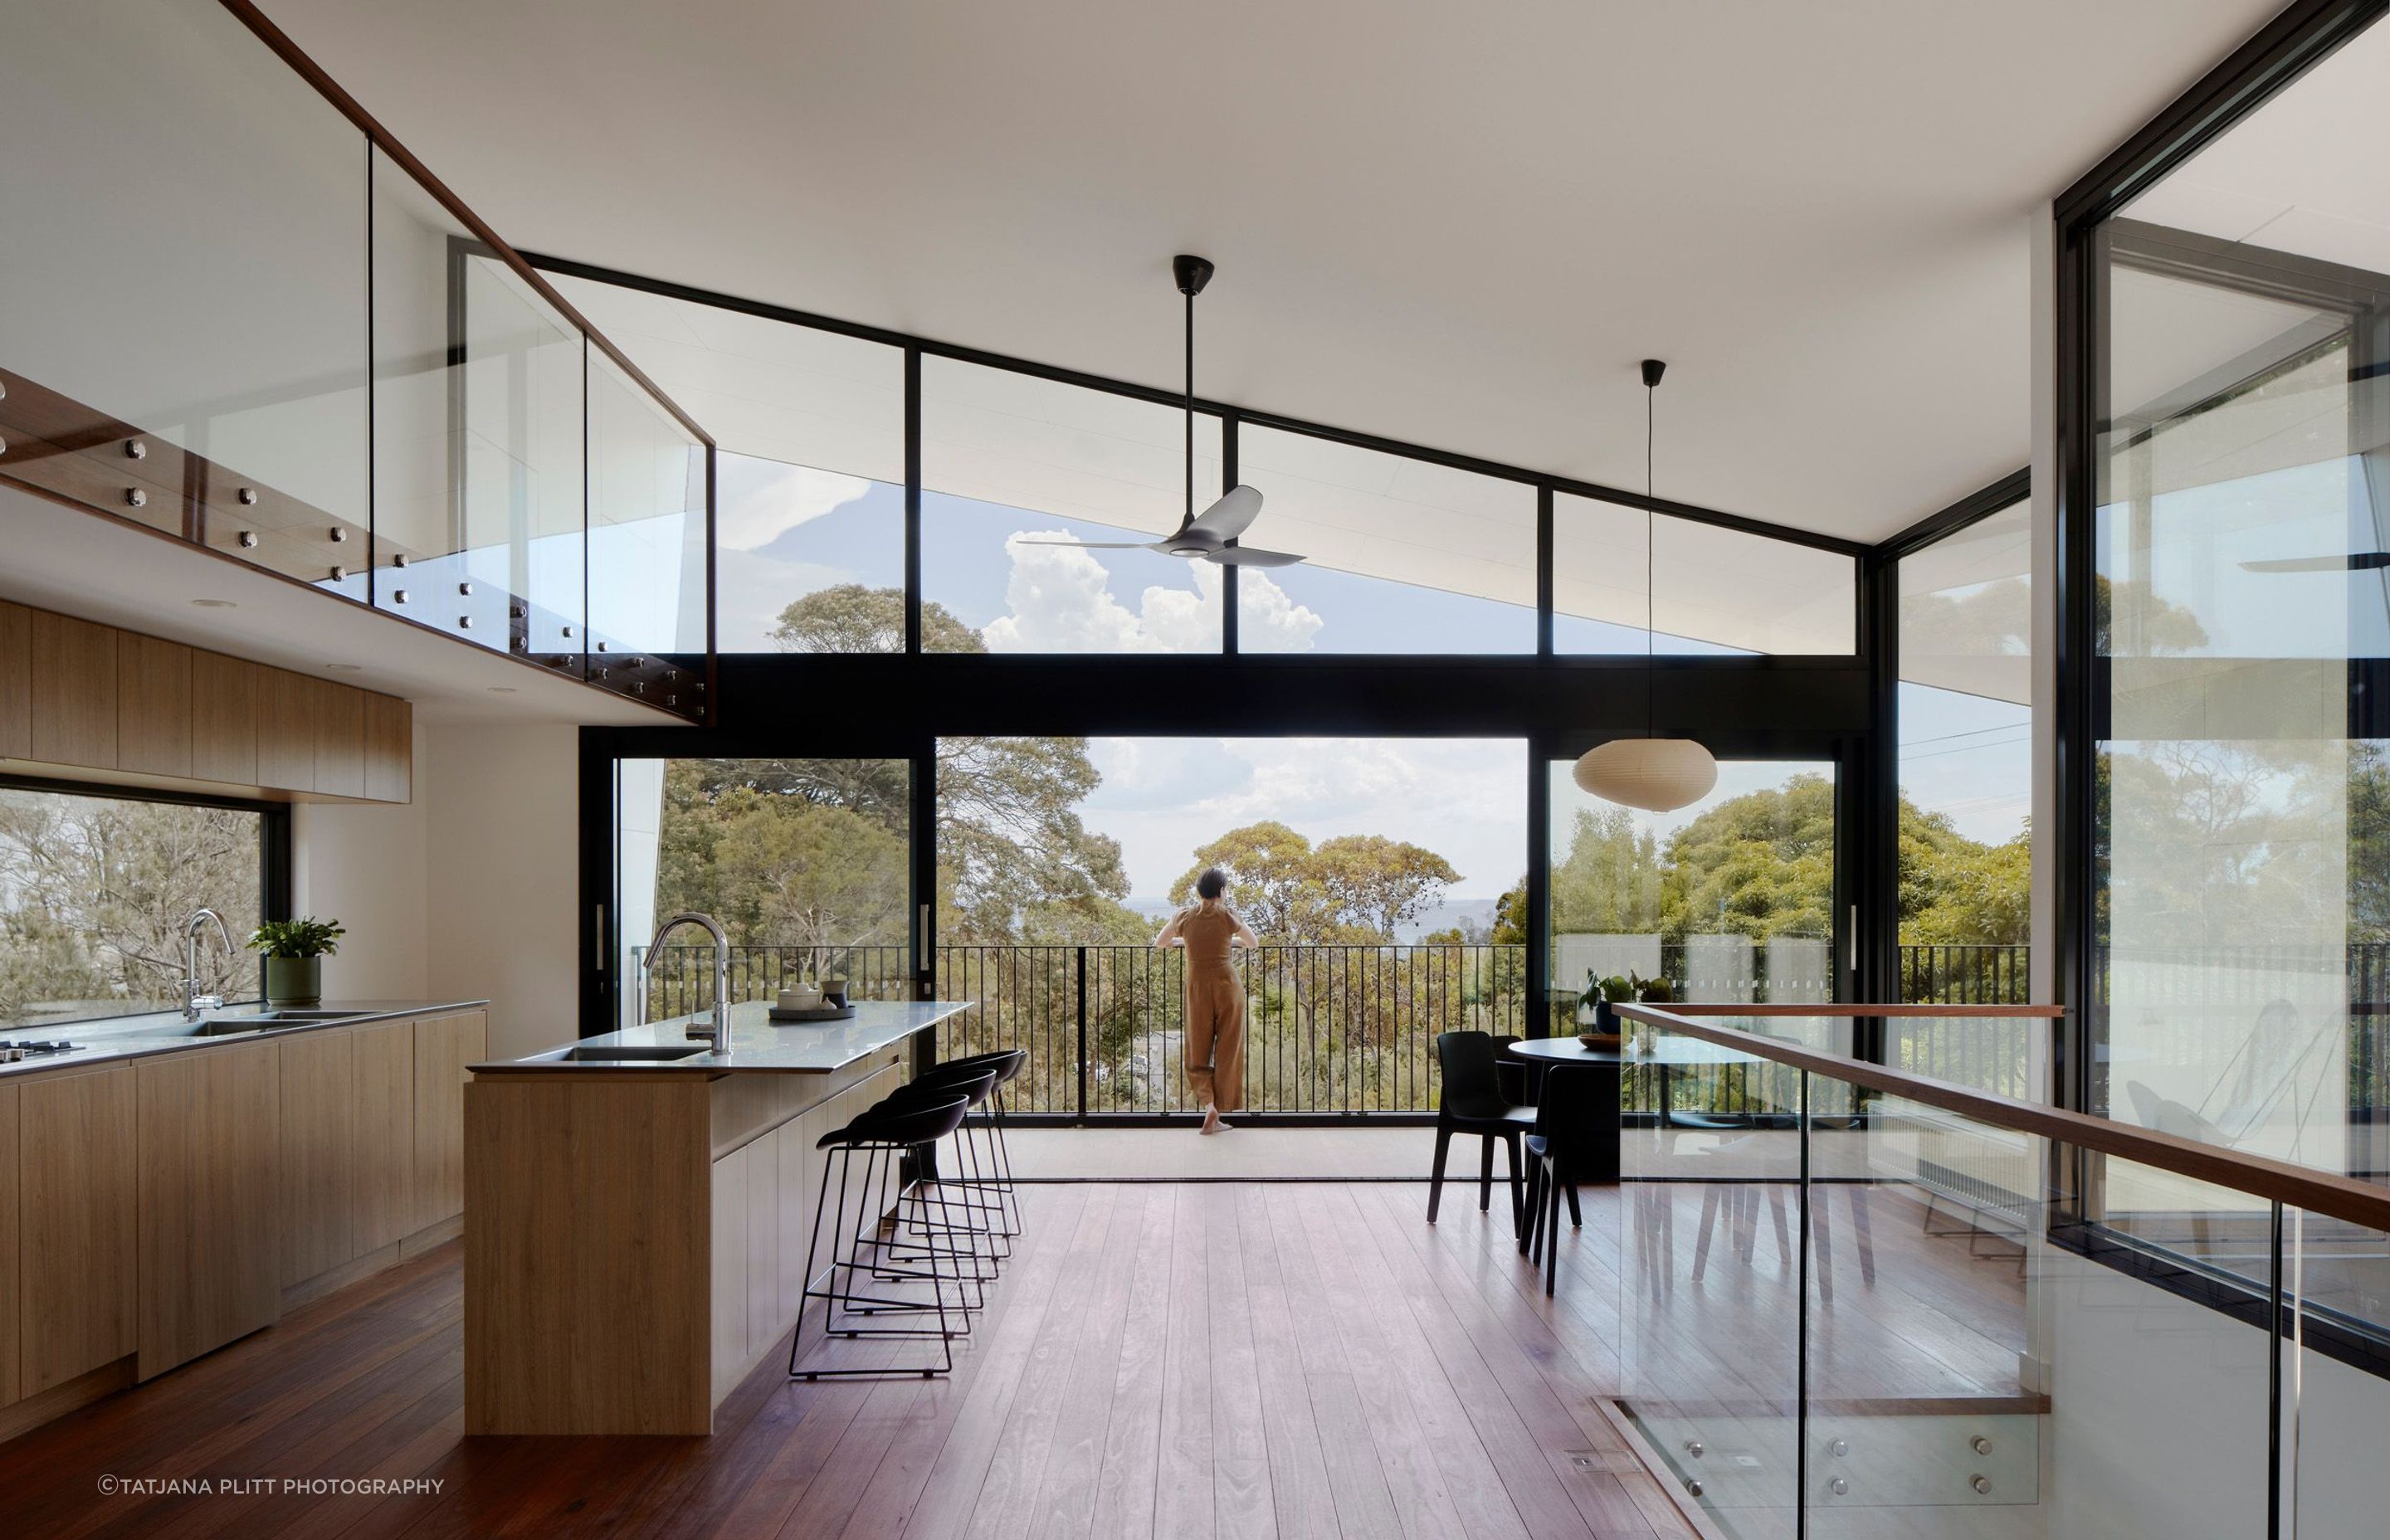 Floor-to-ceiling glazing captures the outlook across the bush landscape and out to the water.